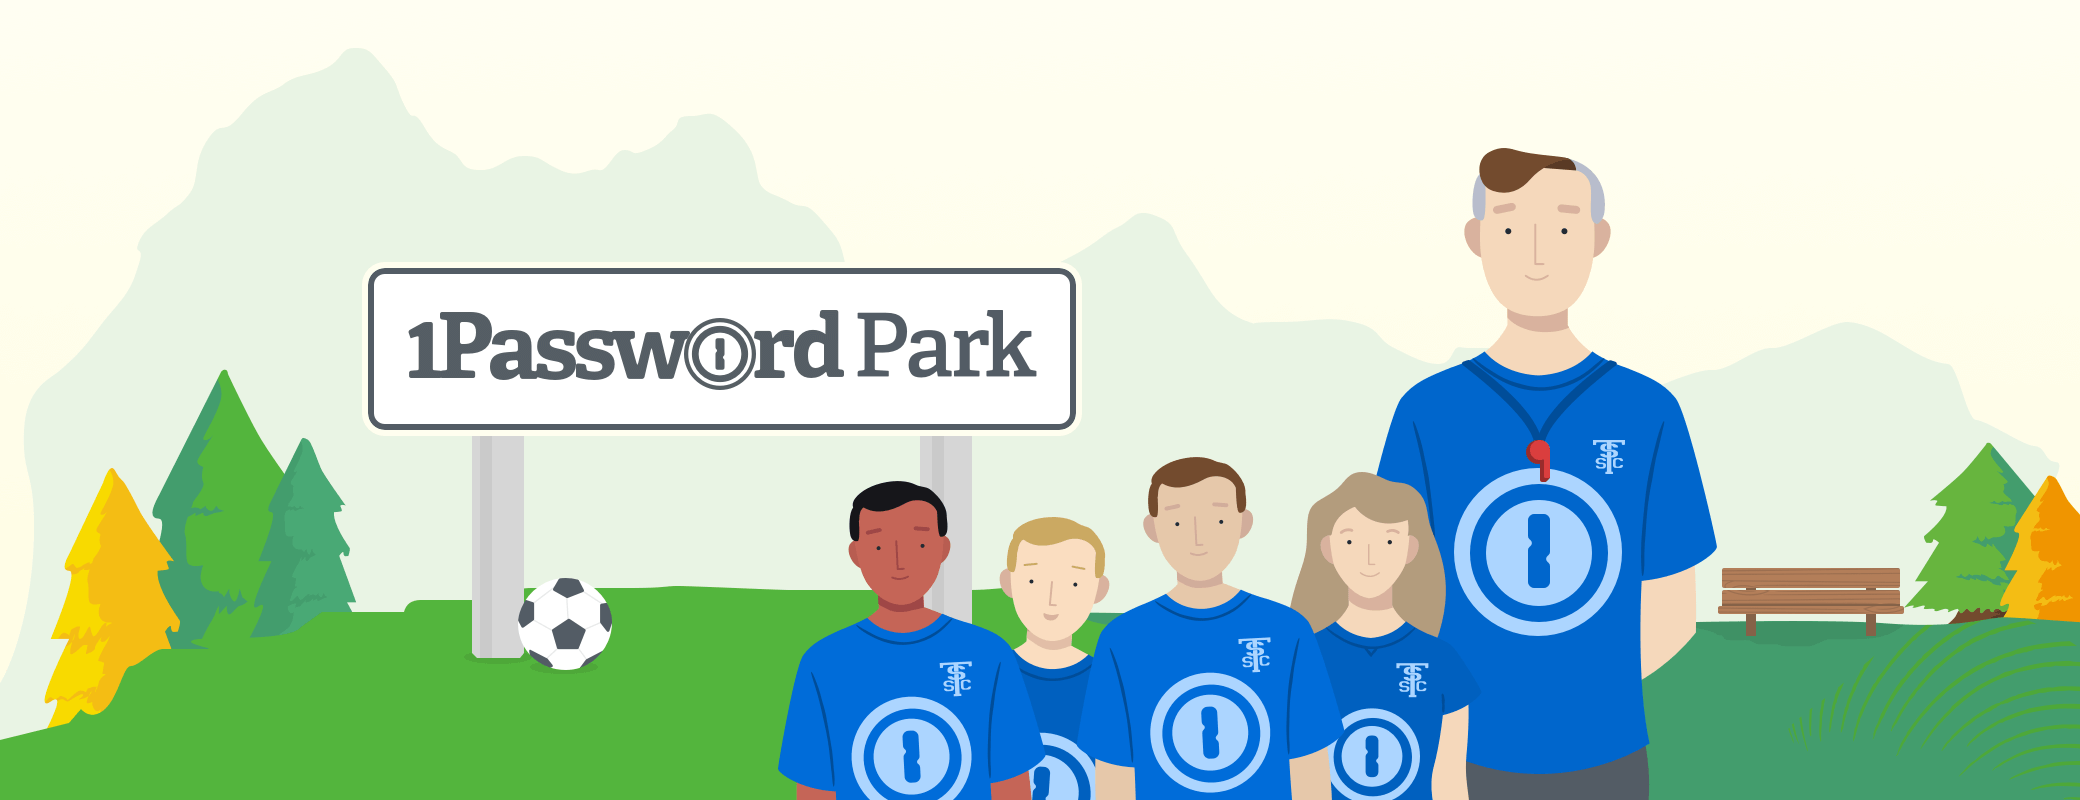 Let's all go to the park - introducing 1Password Park